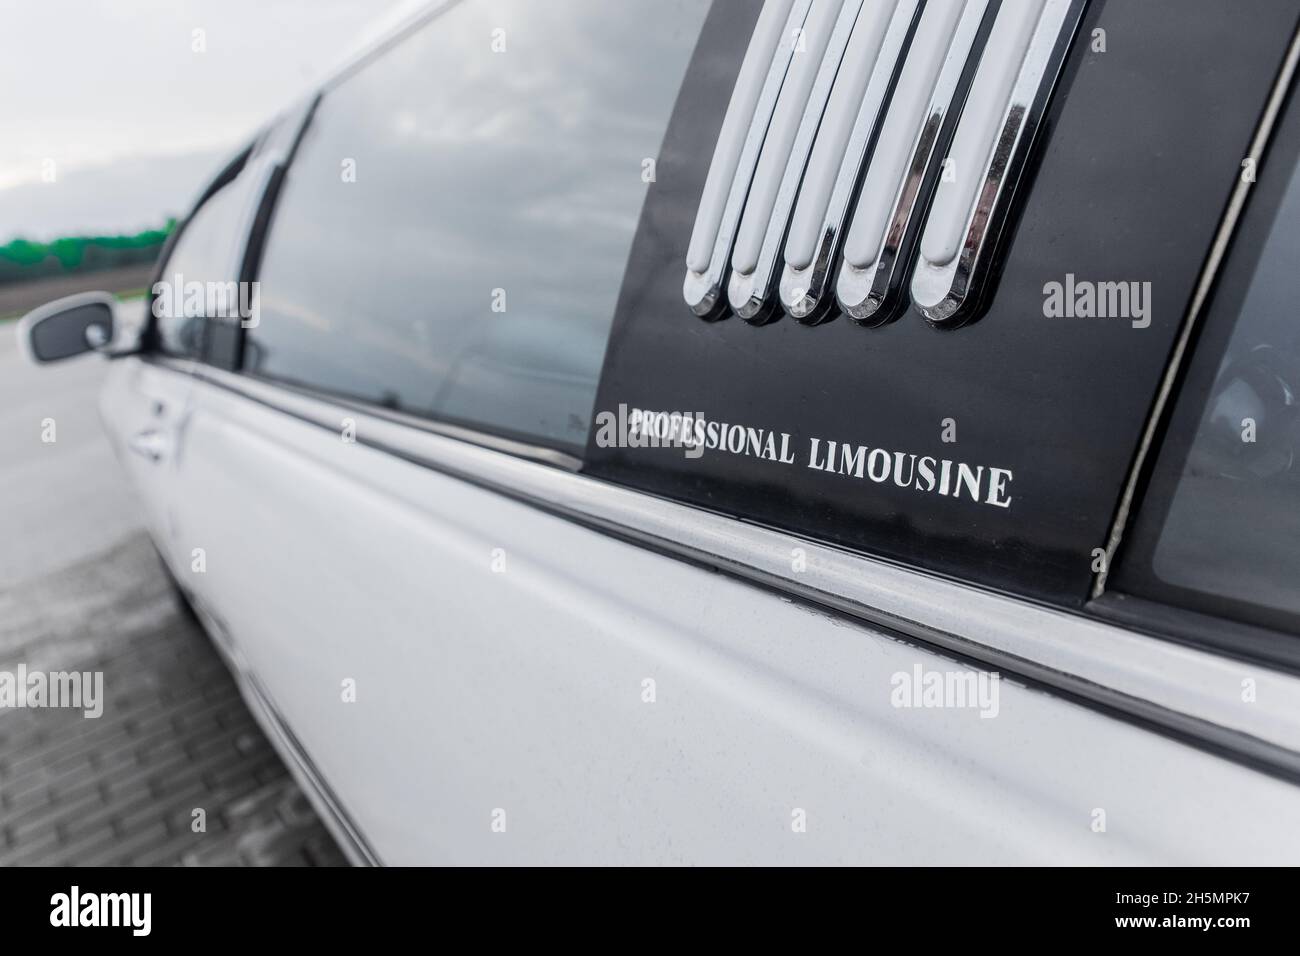 Part of the luxury car design white limousine and window, close-up. Stock Photo